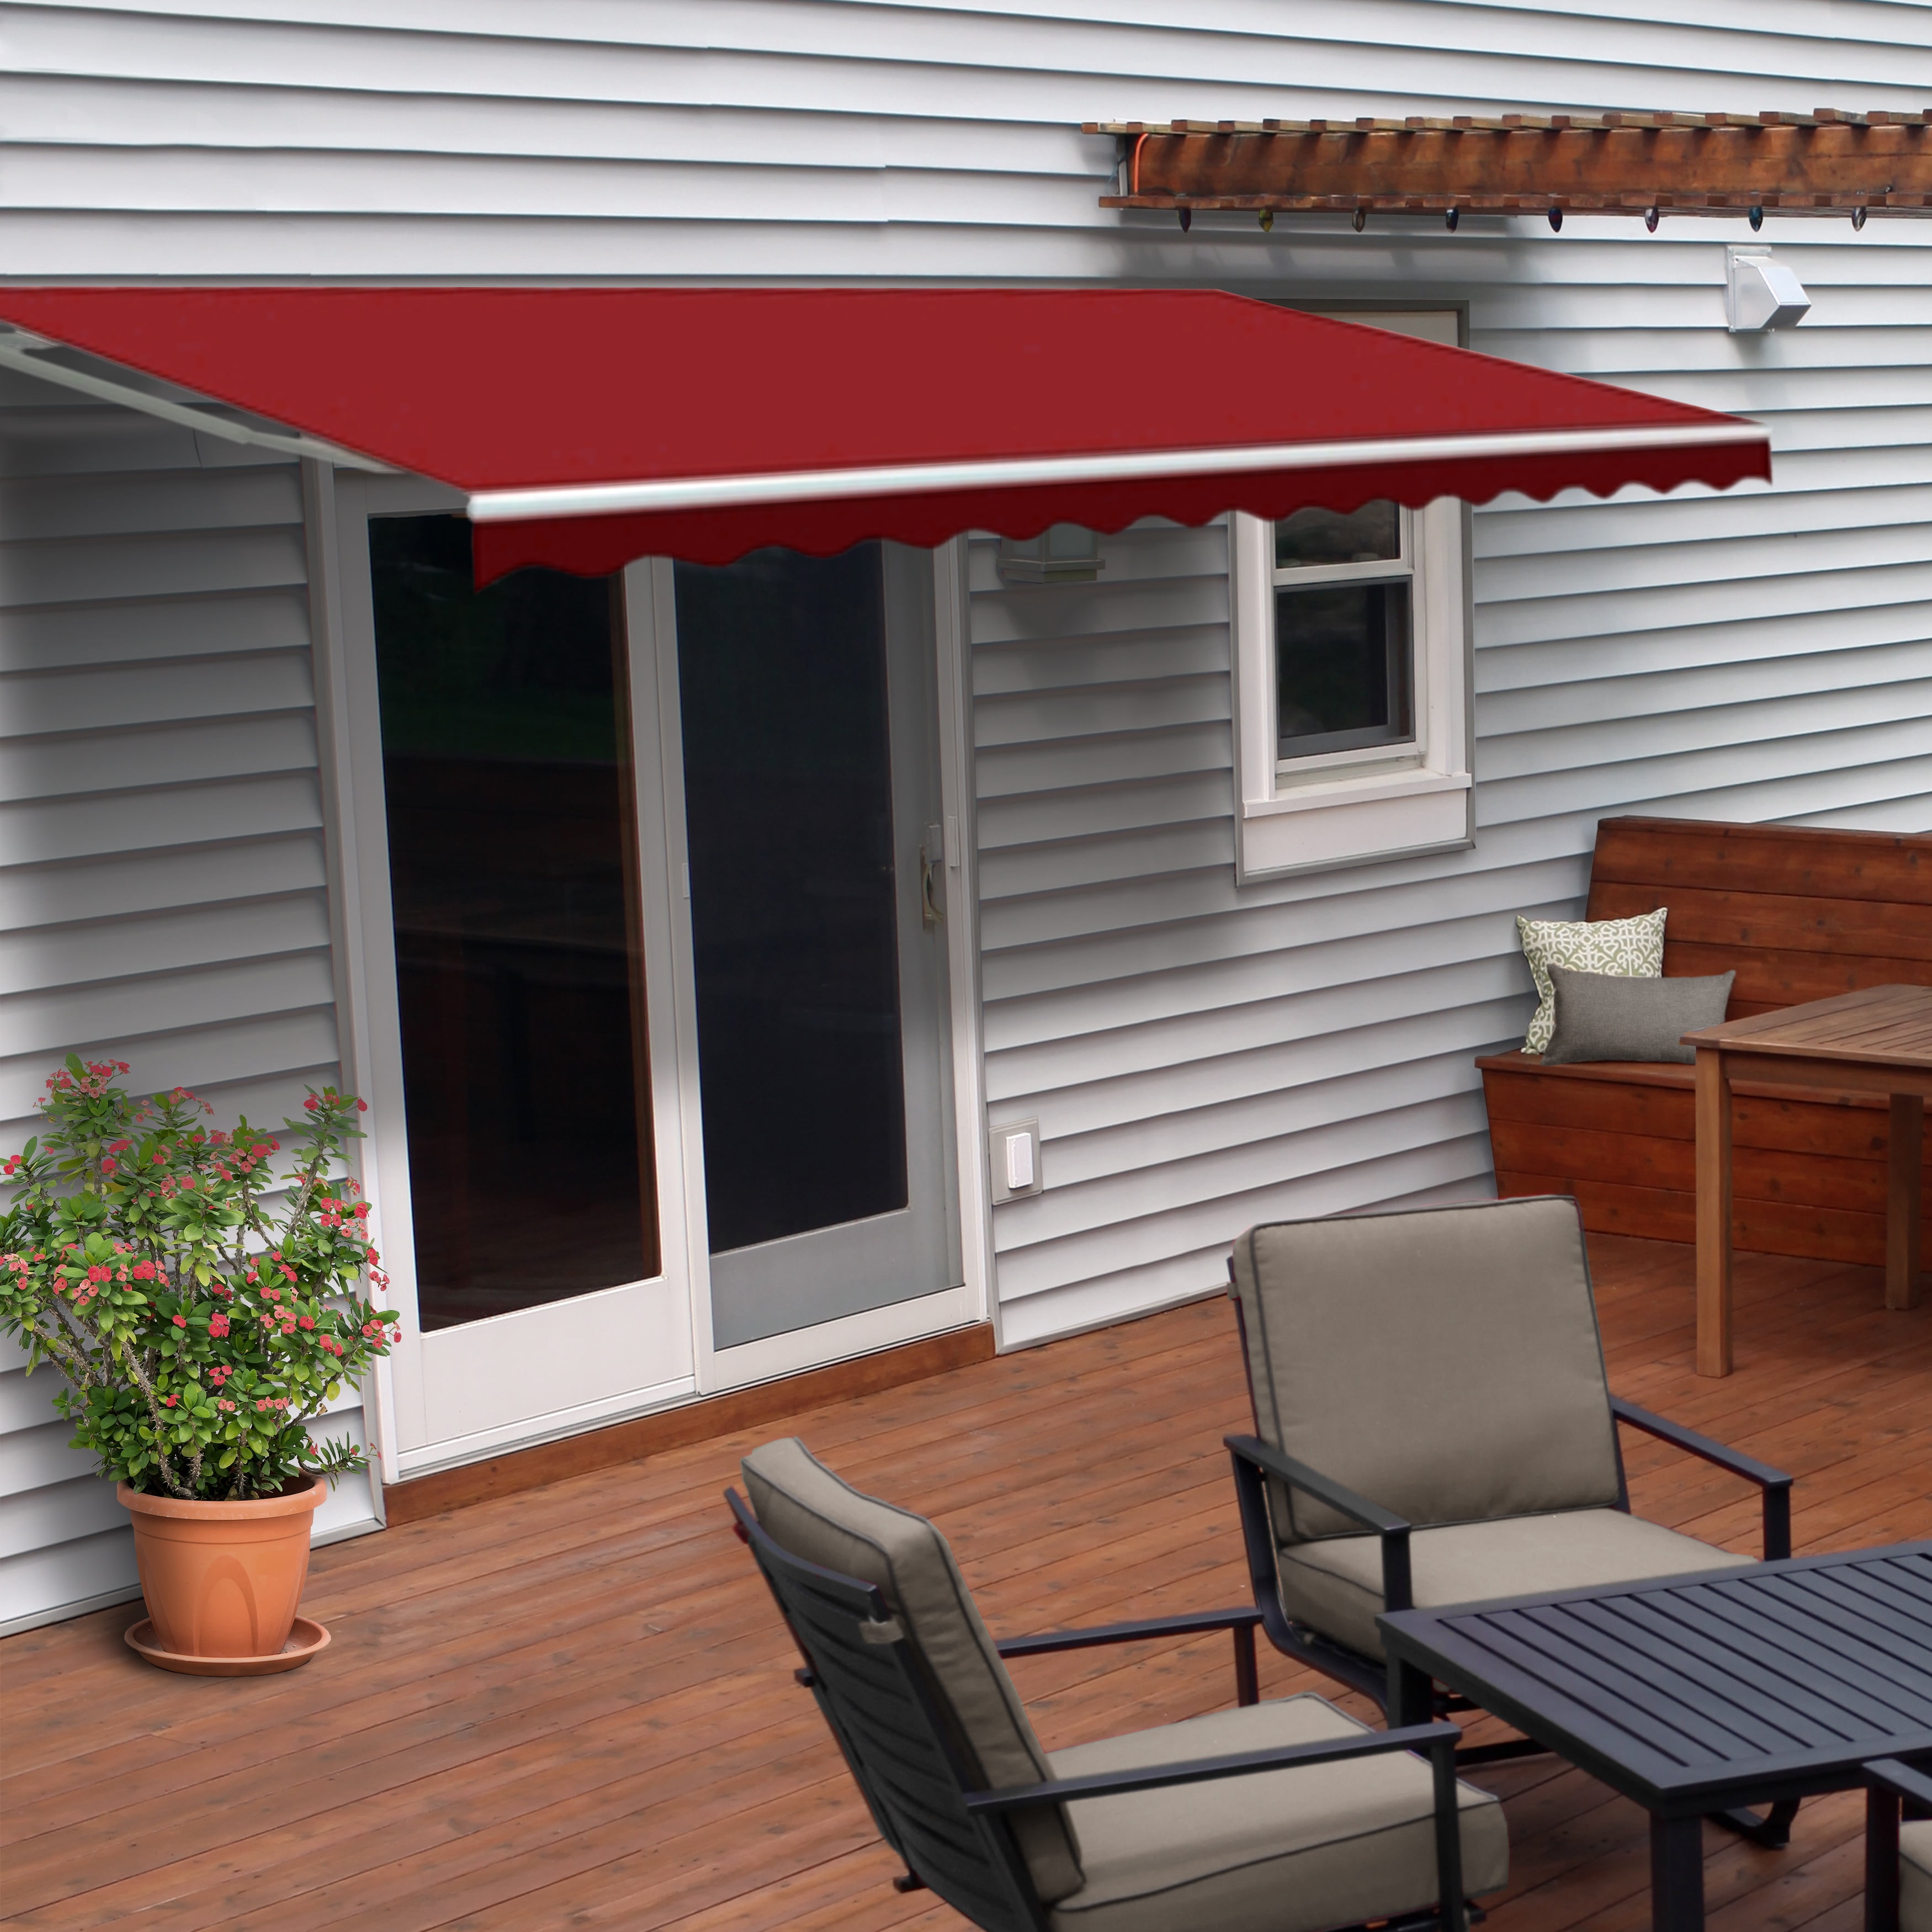 ALEKO Fabric Replacement for Pergola Canopy 13 x 10 Ft Burgundy Color 